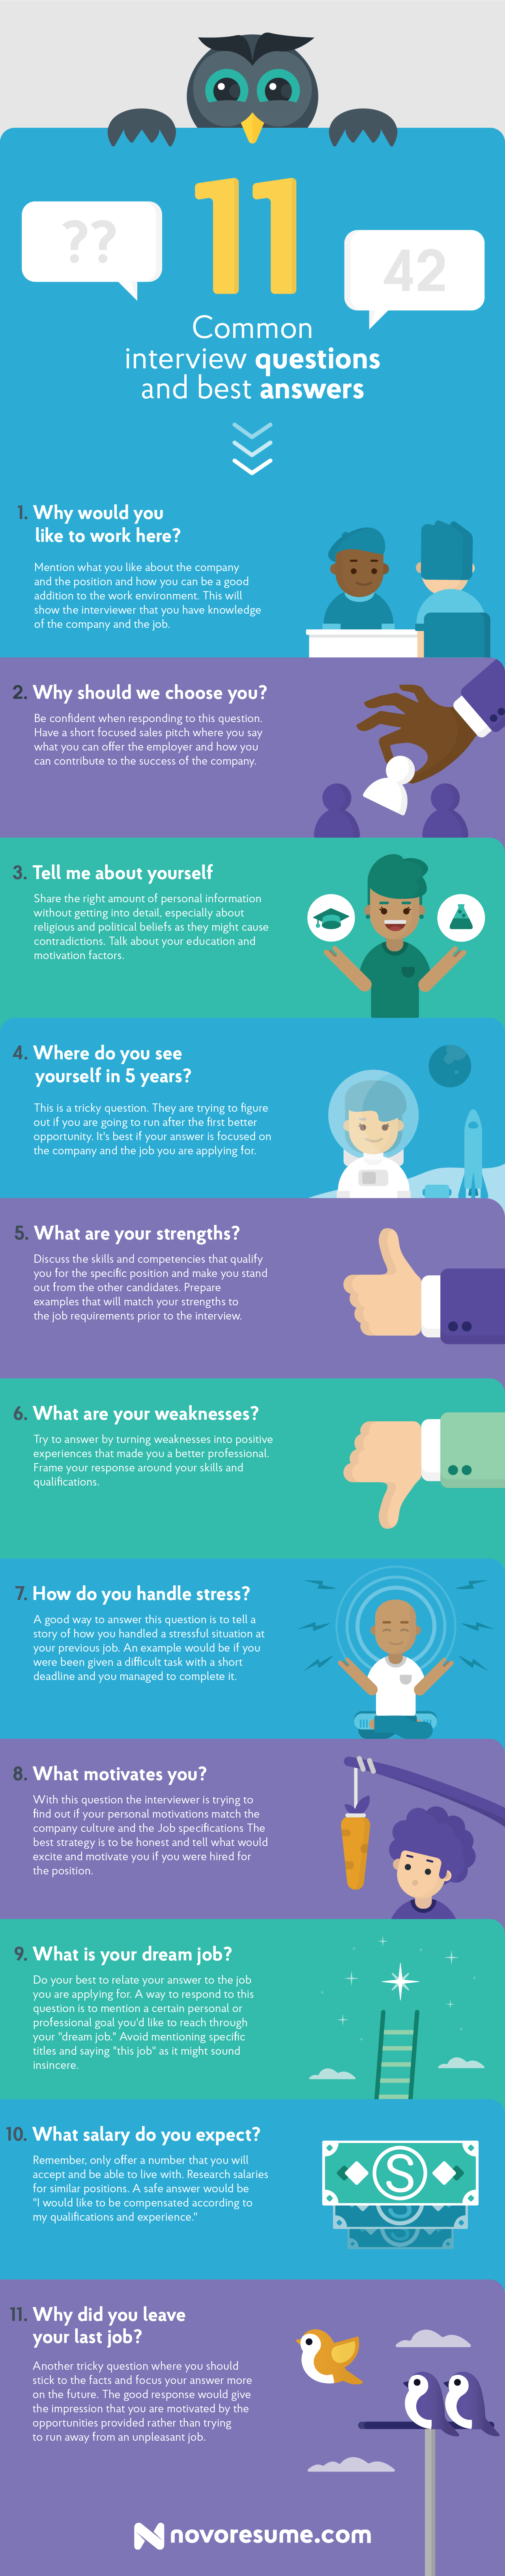 interview questions and answers info graphic